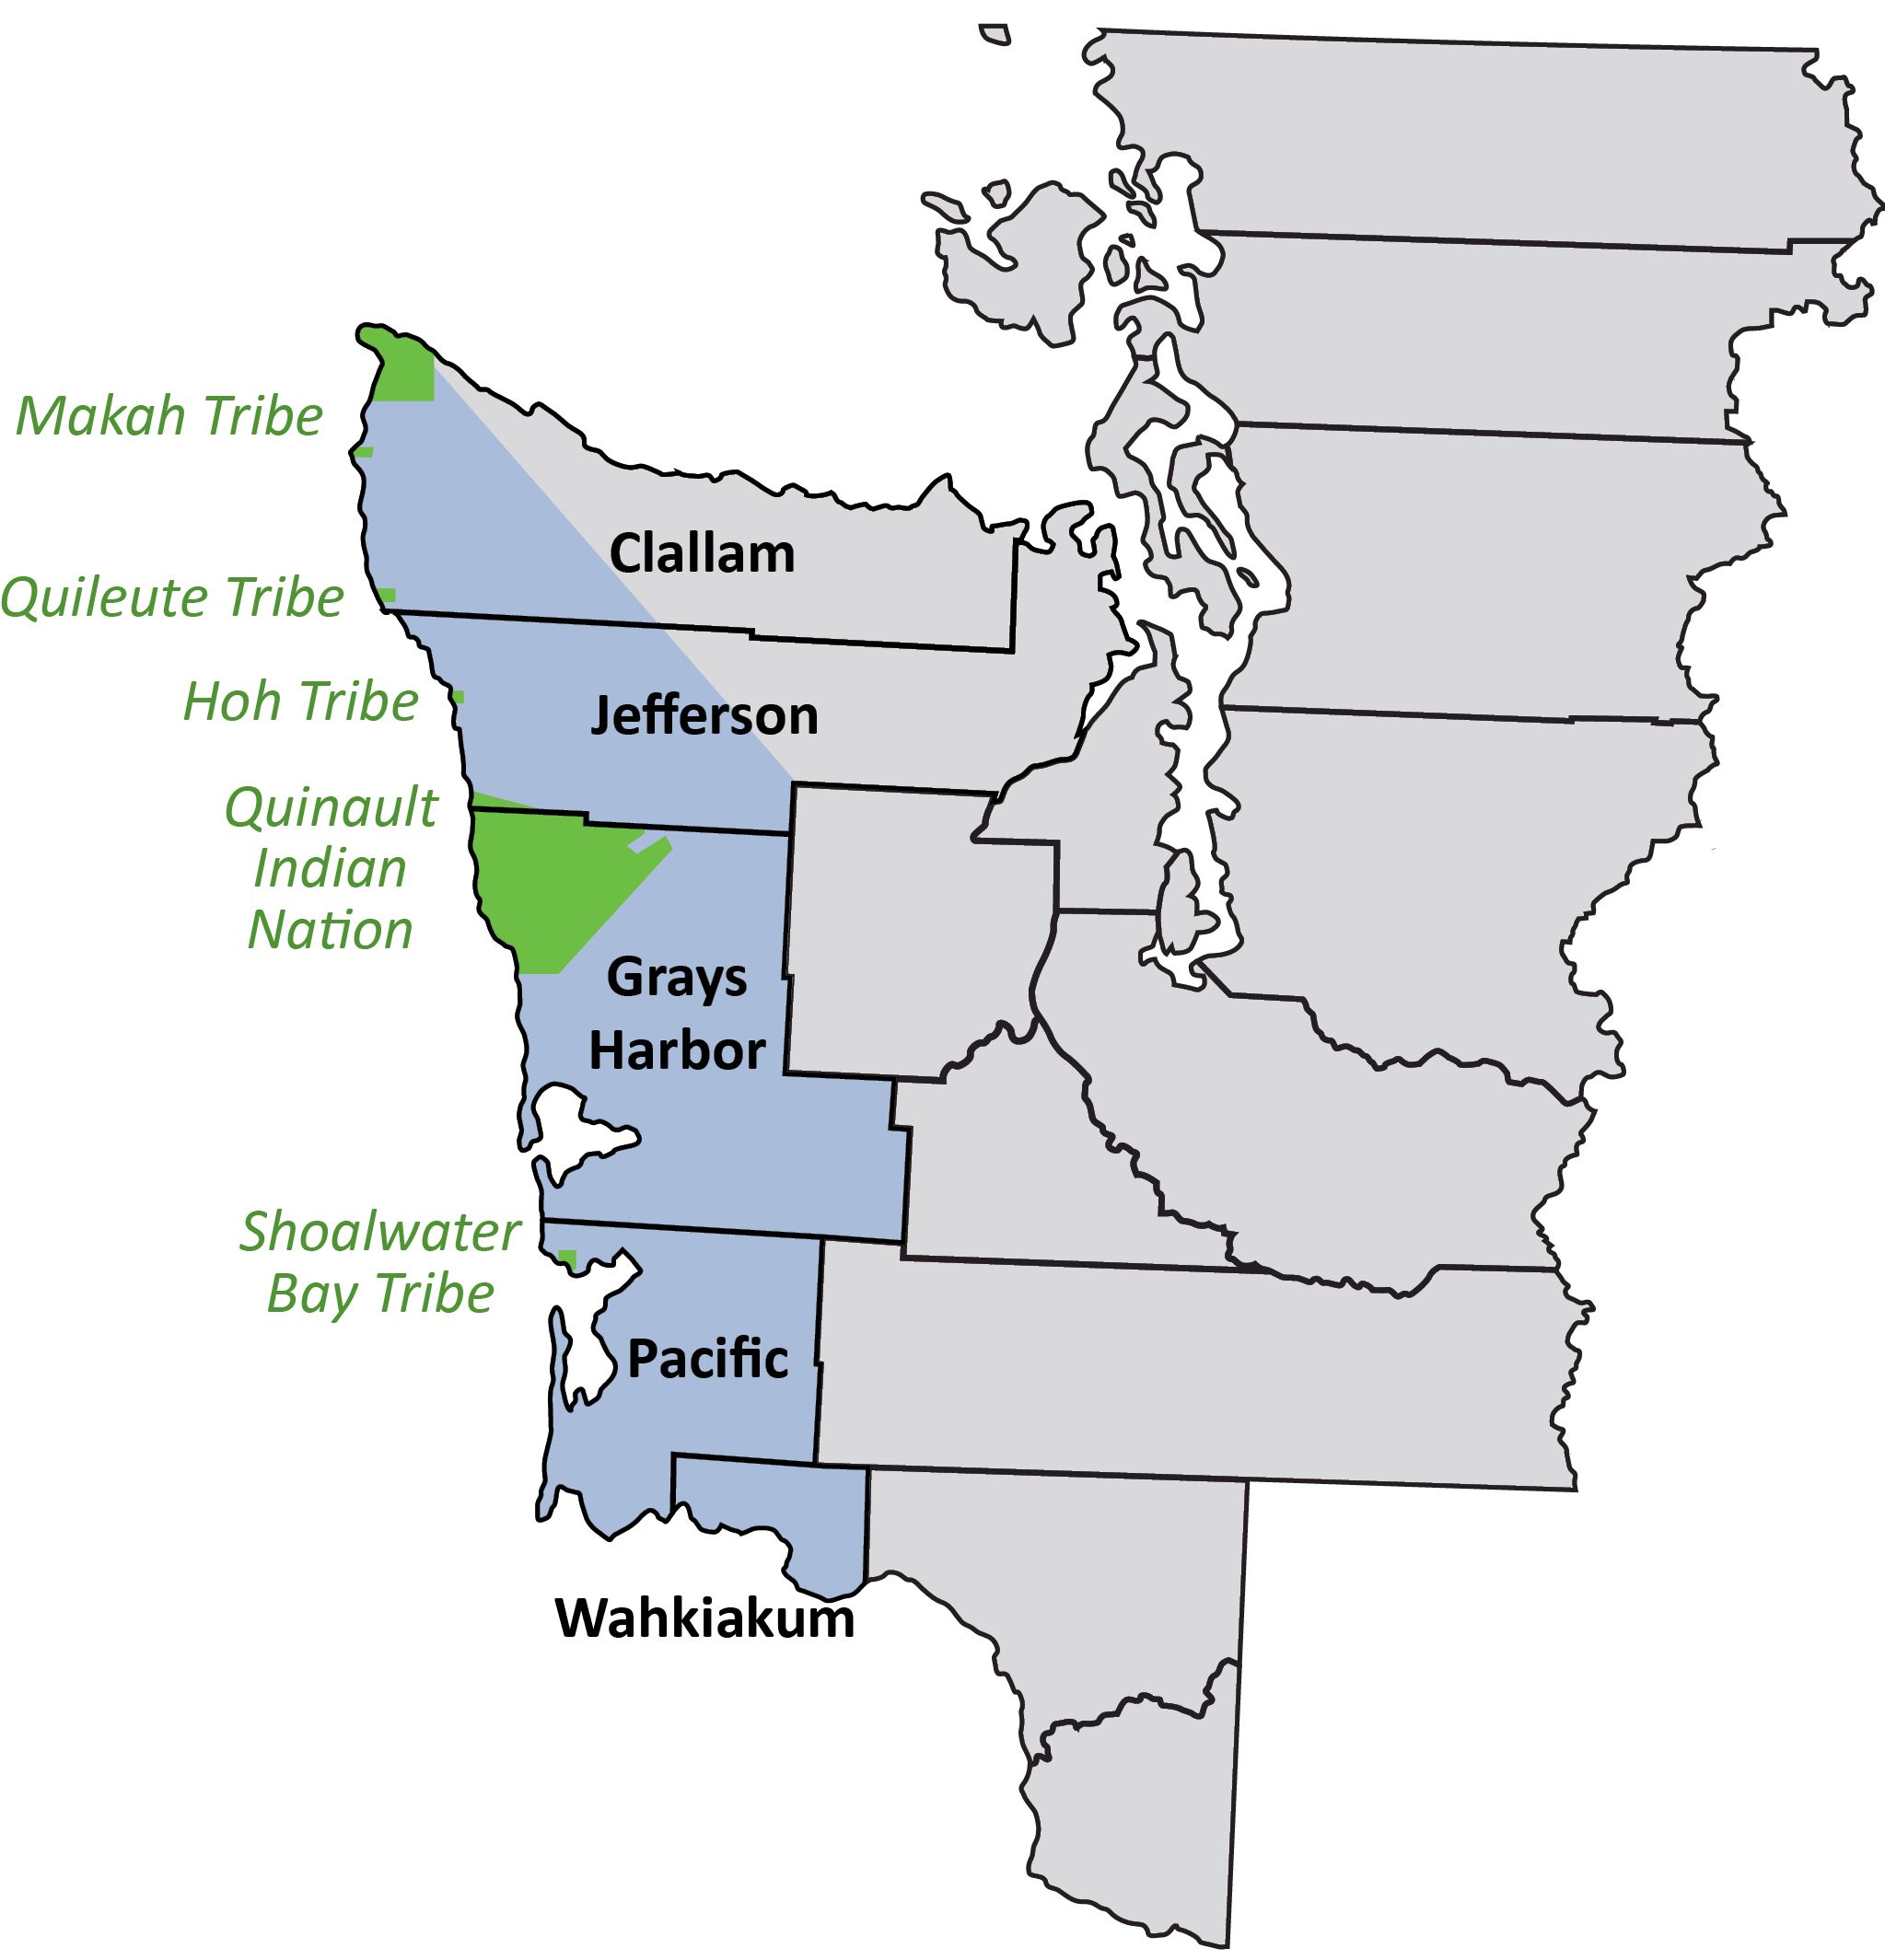 The counties and tribes of Washington State’s Pacific Coast